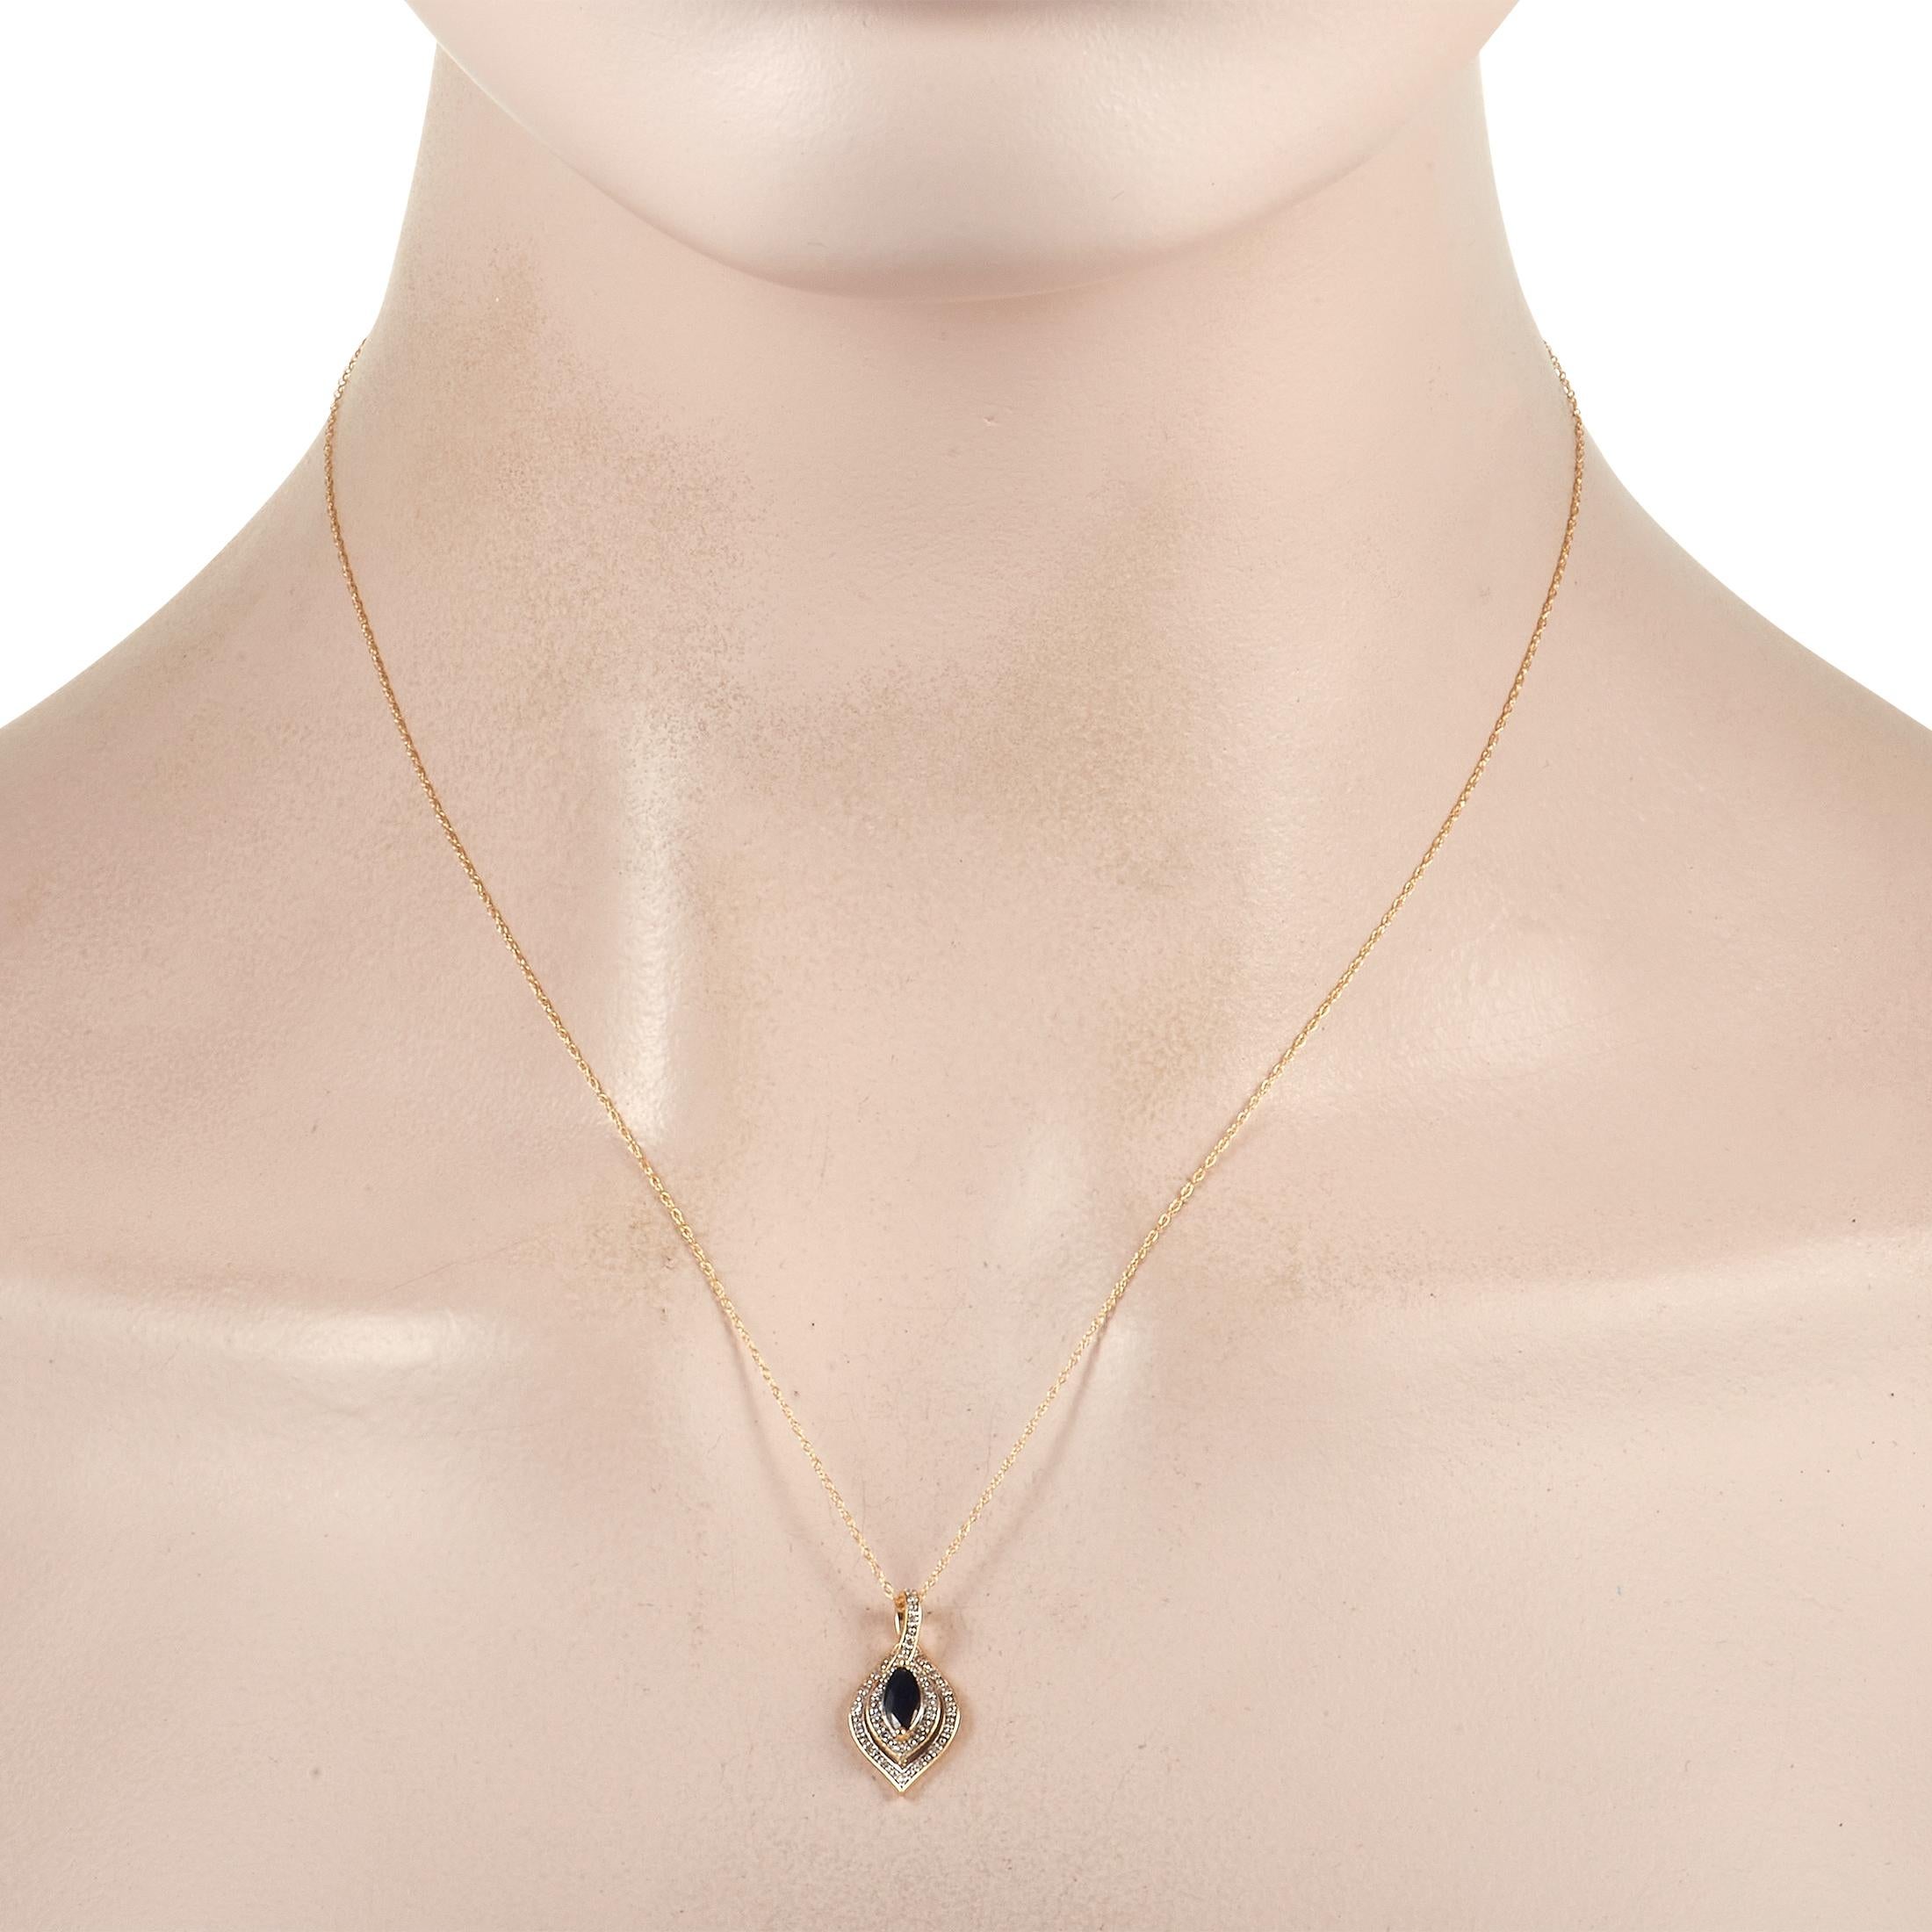 This luxurious 14K Yellow Gold necklace has a timeless quality that makes it an essential addition to any collection. At the center of the dazzling pendant, you’ll find a sapphire gemstone surrounded by diamond accents with a total weight of 0.08